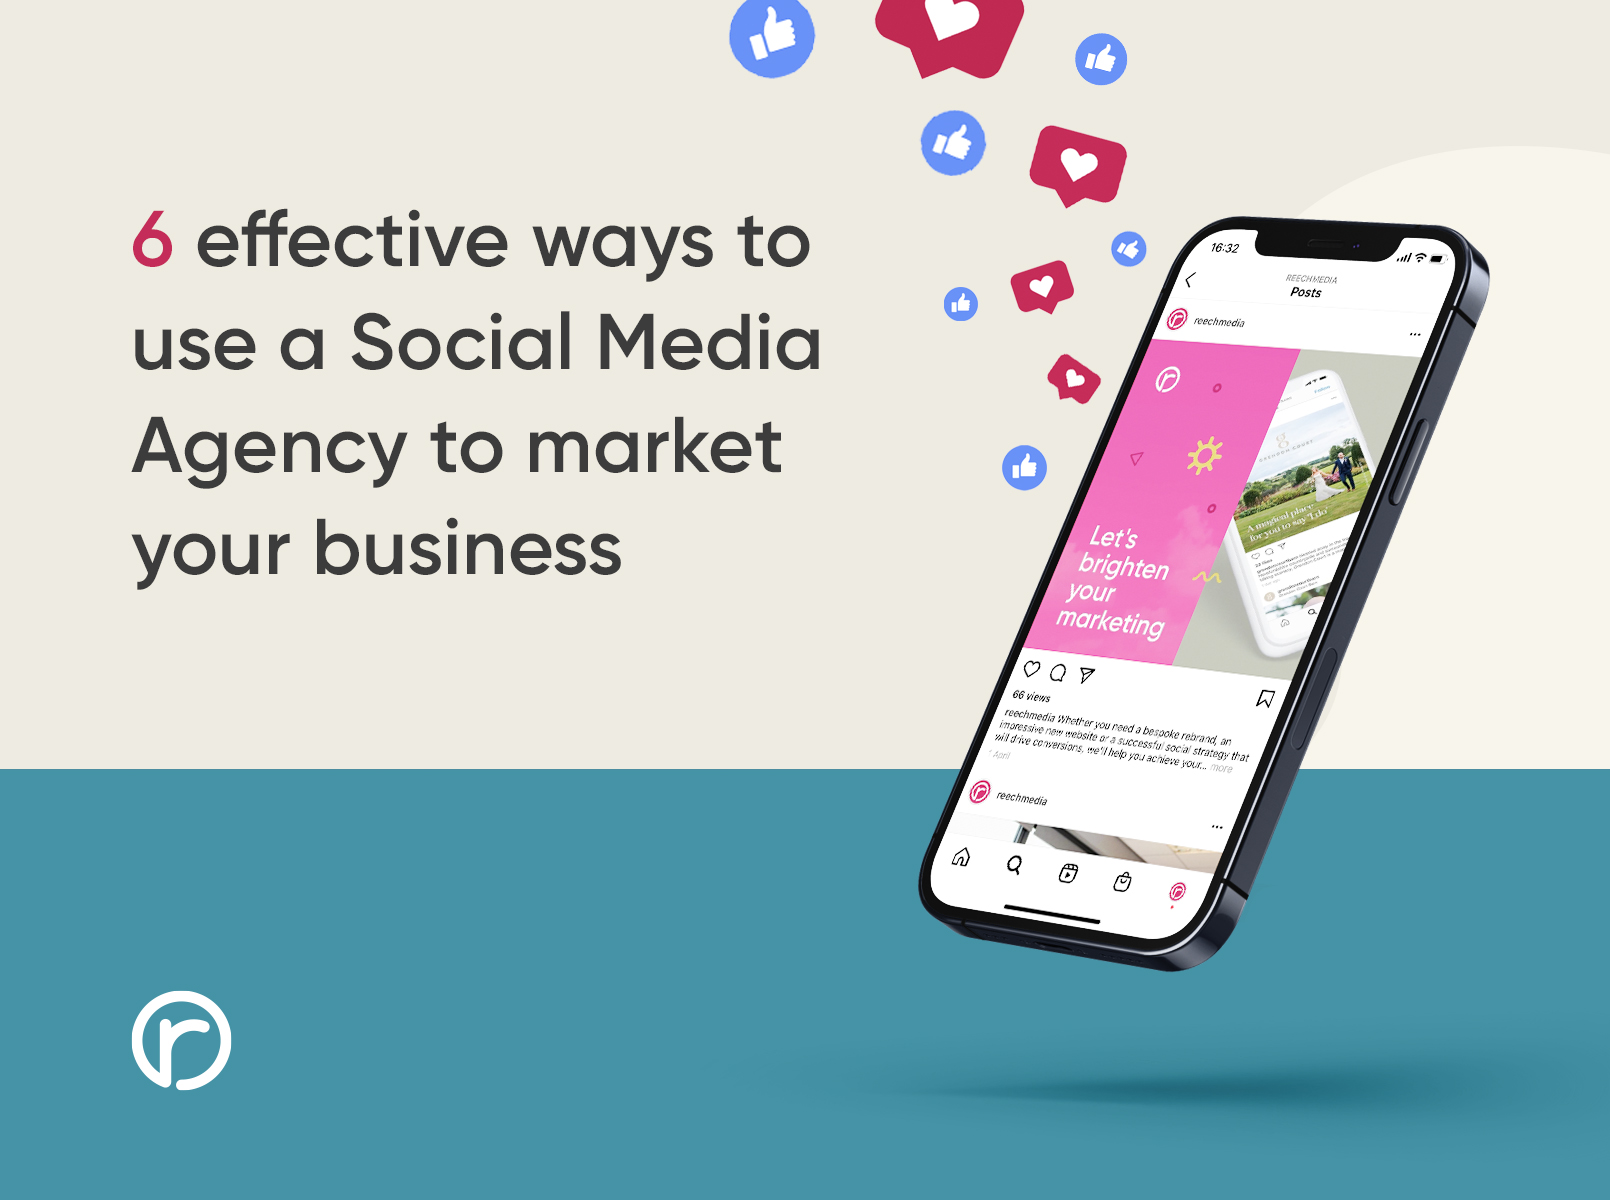 Six effective ways to use a Social Media Agency to market your business